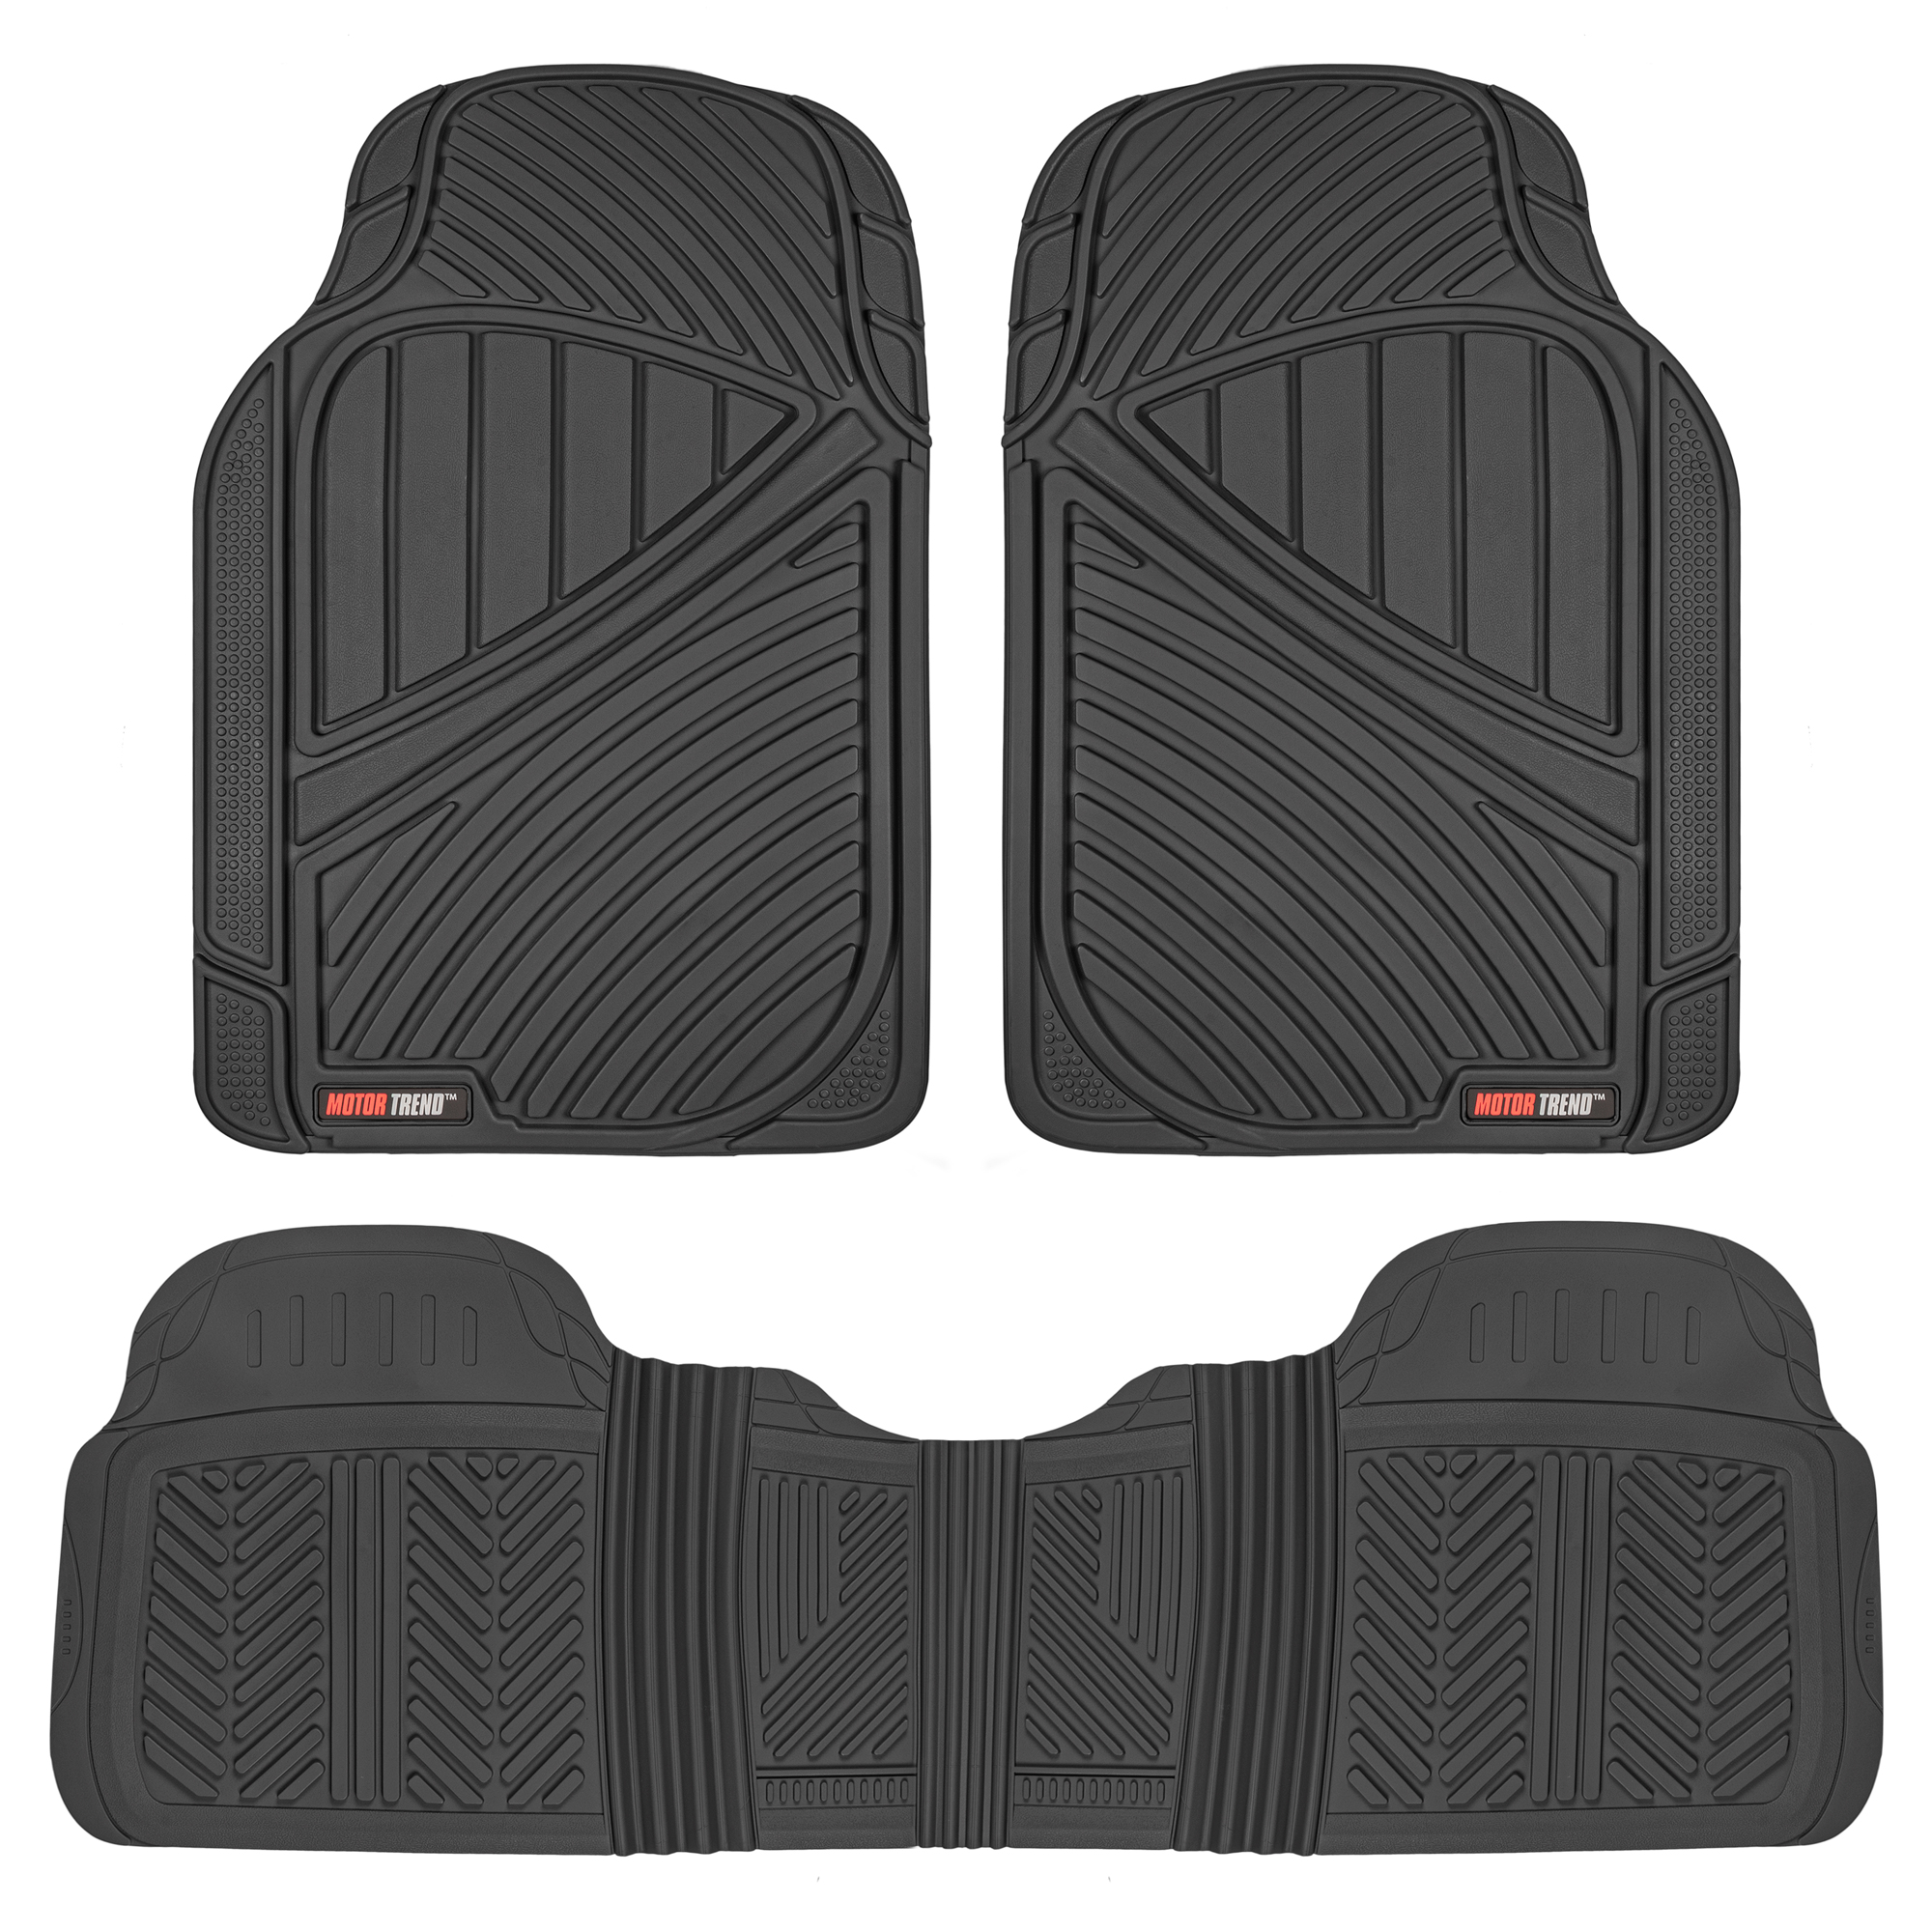 Motor Trend FlexTough Floor Mats for Car SUV and Van 3 Rows, Odorless EcoClean Liners, 3 Colors - image 2 of 10